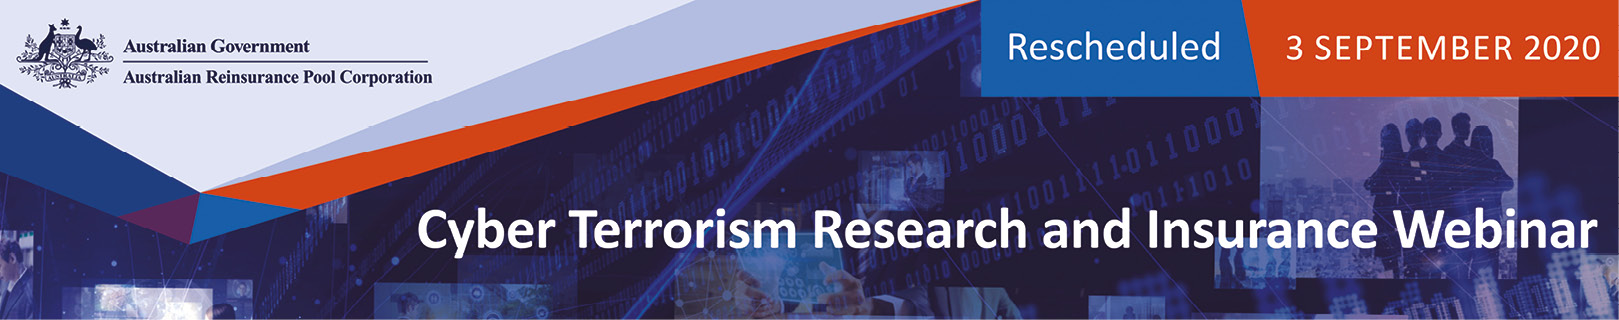 Image: Cyber Terrorism Research and Insurance Webinar banner